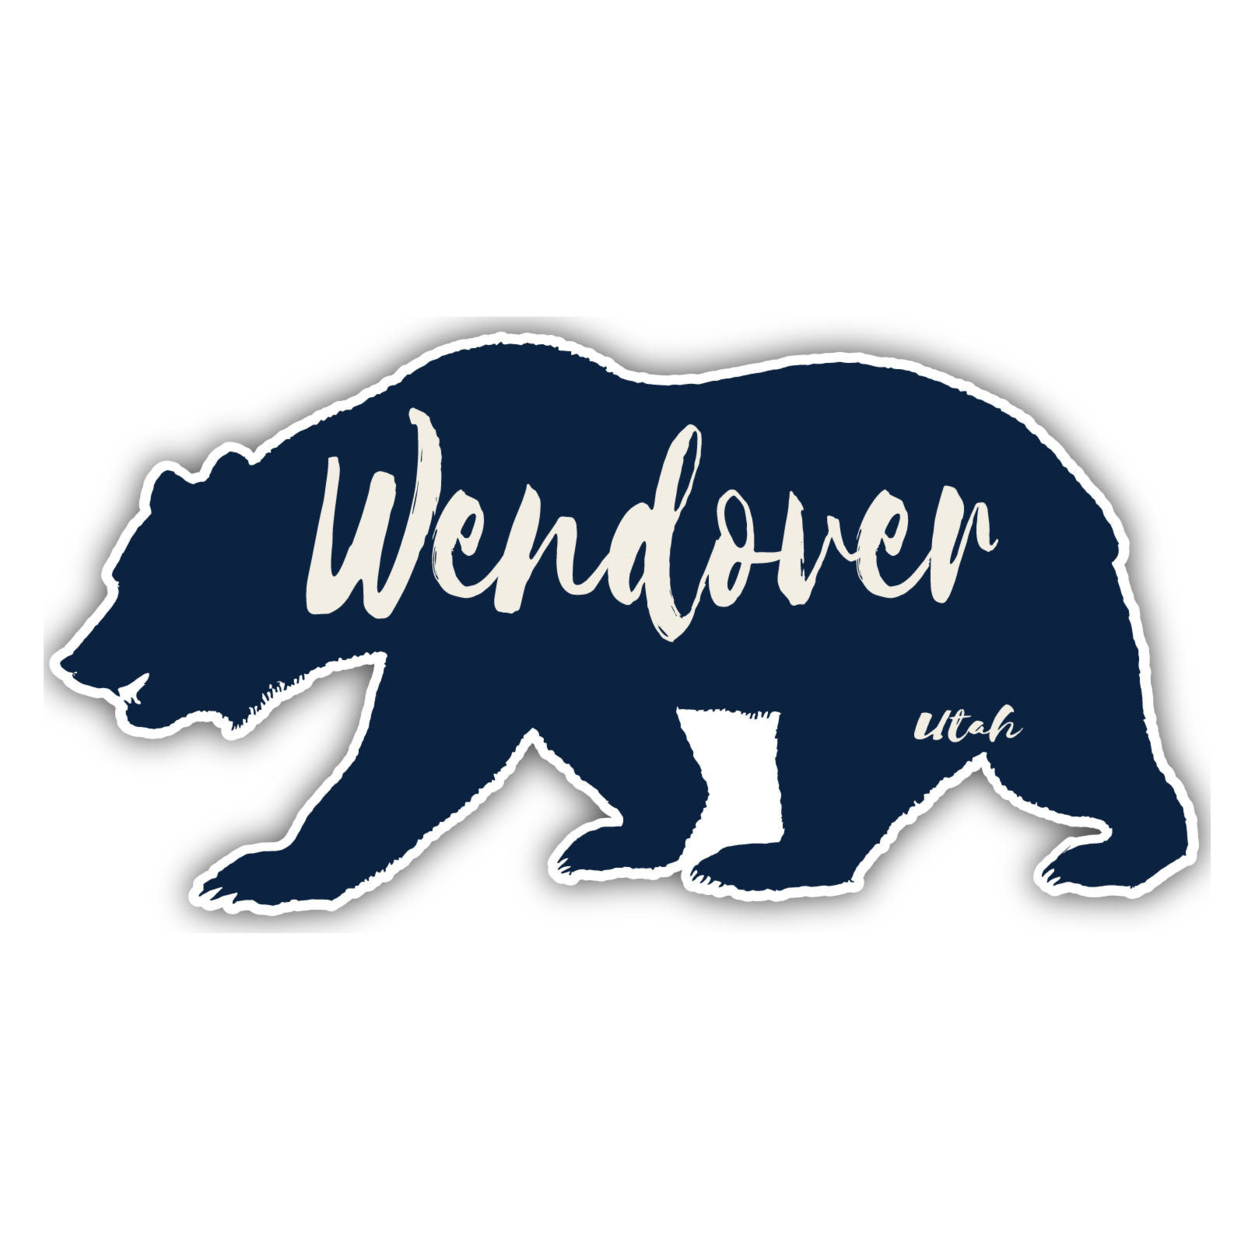 Wendover Utah Souvenir Decorative Stickers (Choose Theme And Size) - Single Unit, 4-Inch, Great Outdoors